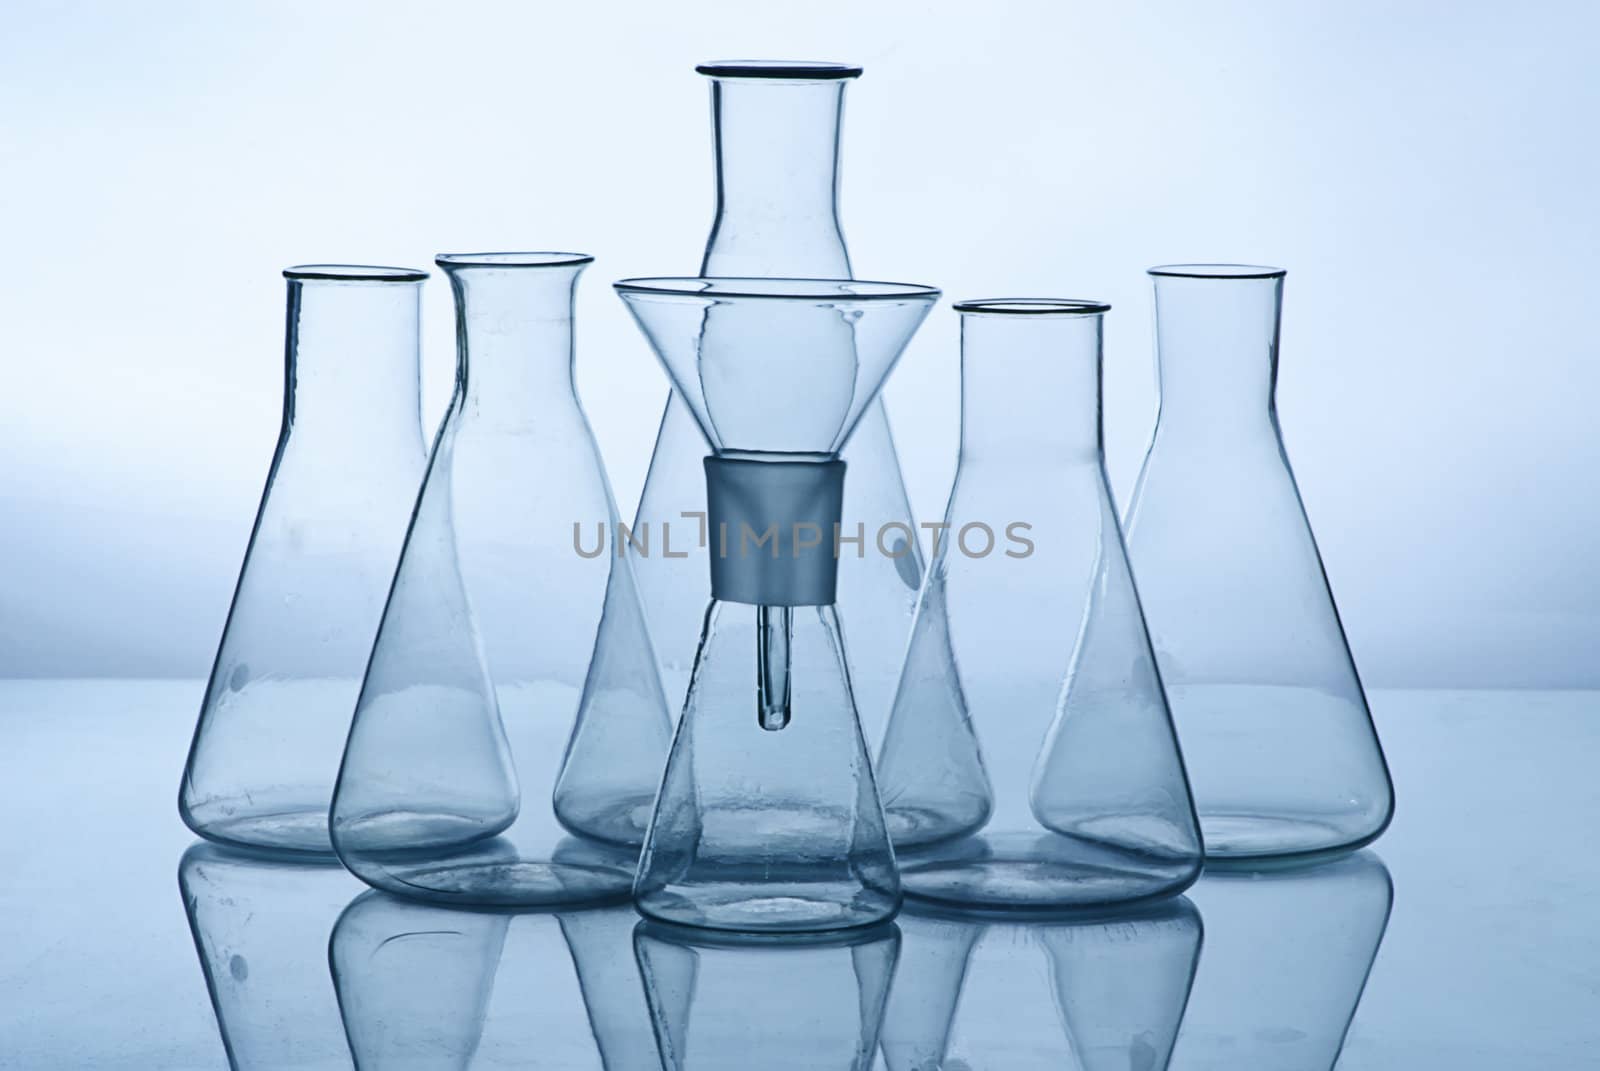 
Glass laboratory equipment for science research